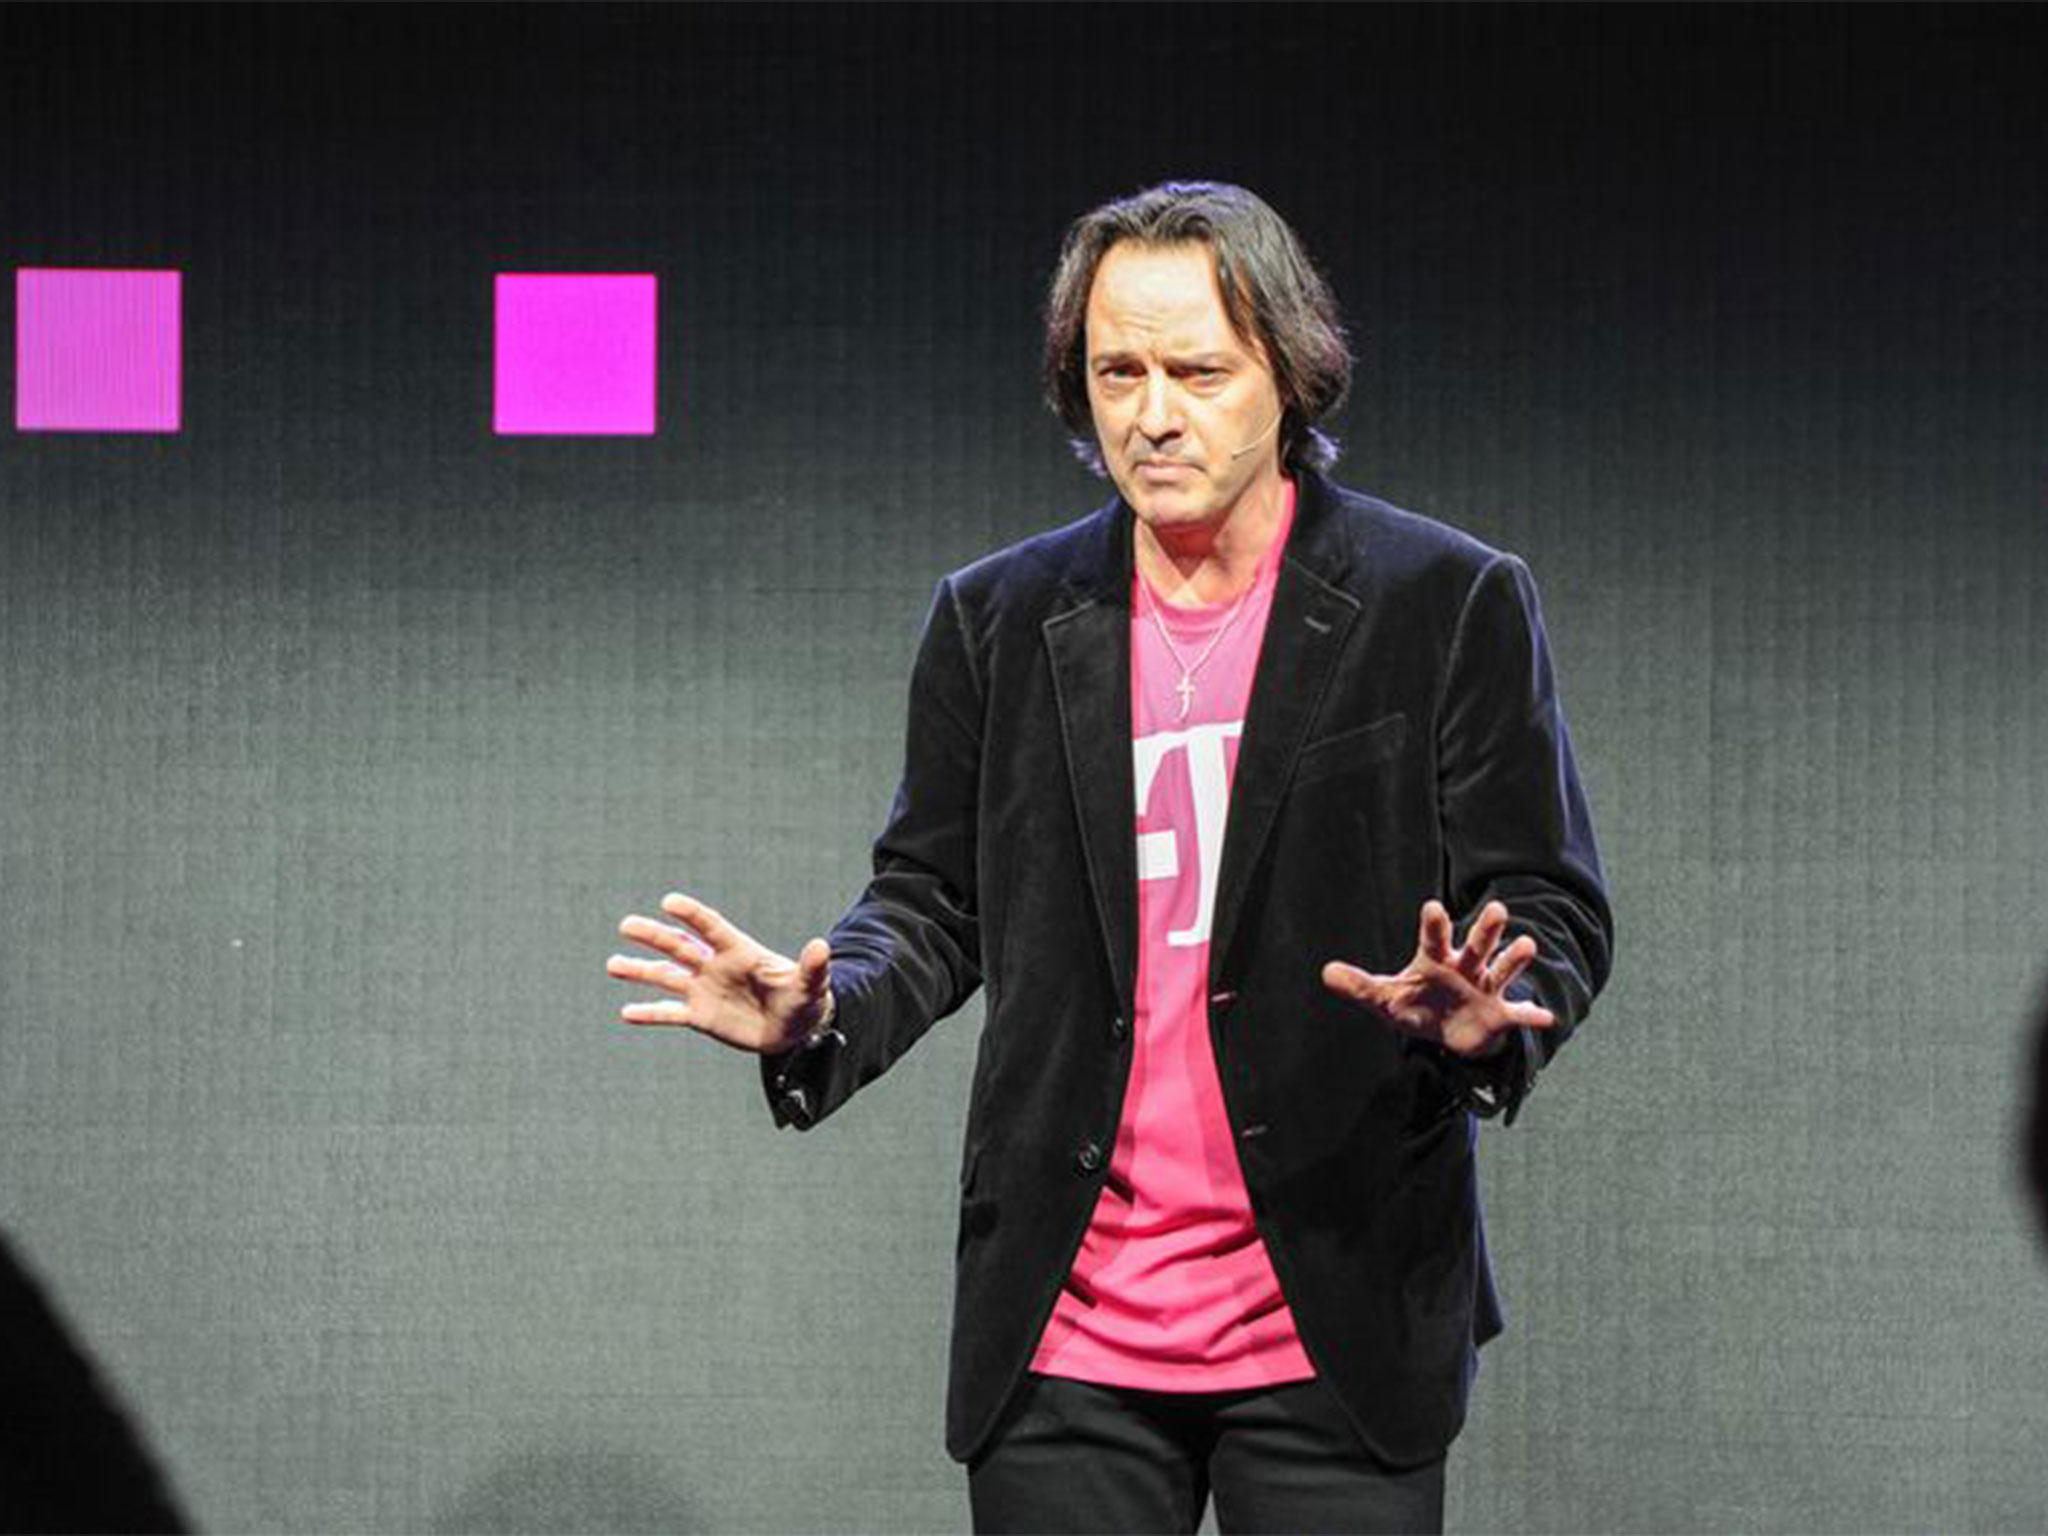 T-Mobile adds 2.5 million new customers in Q1 2014